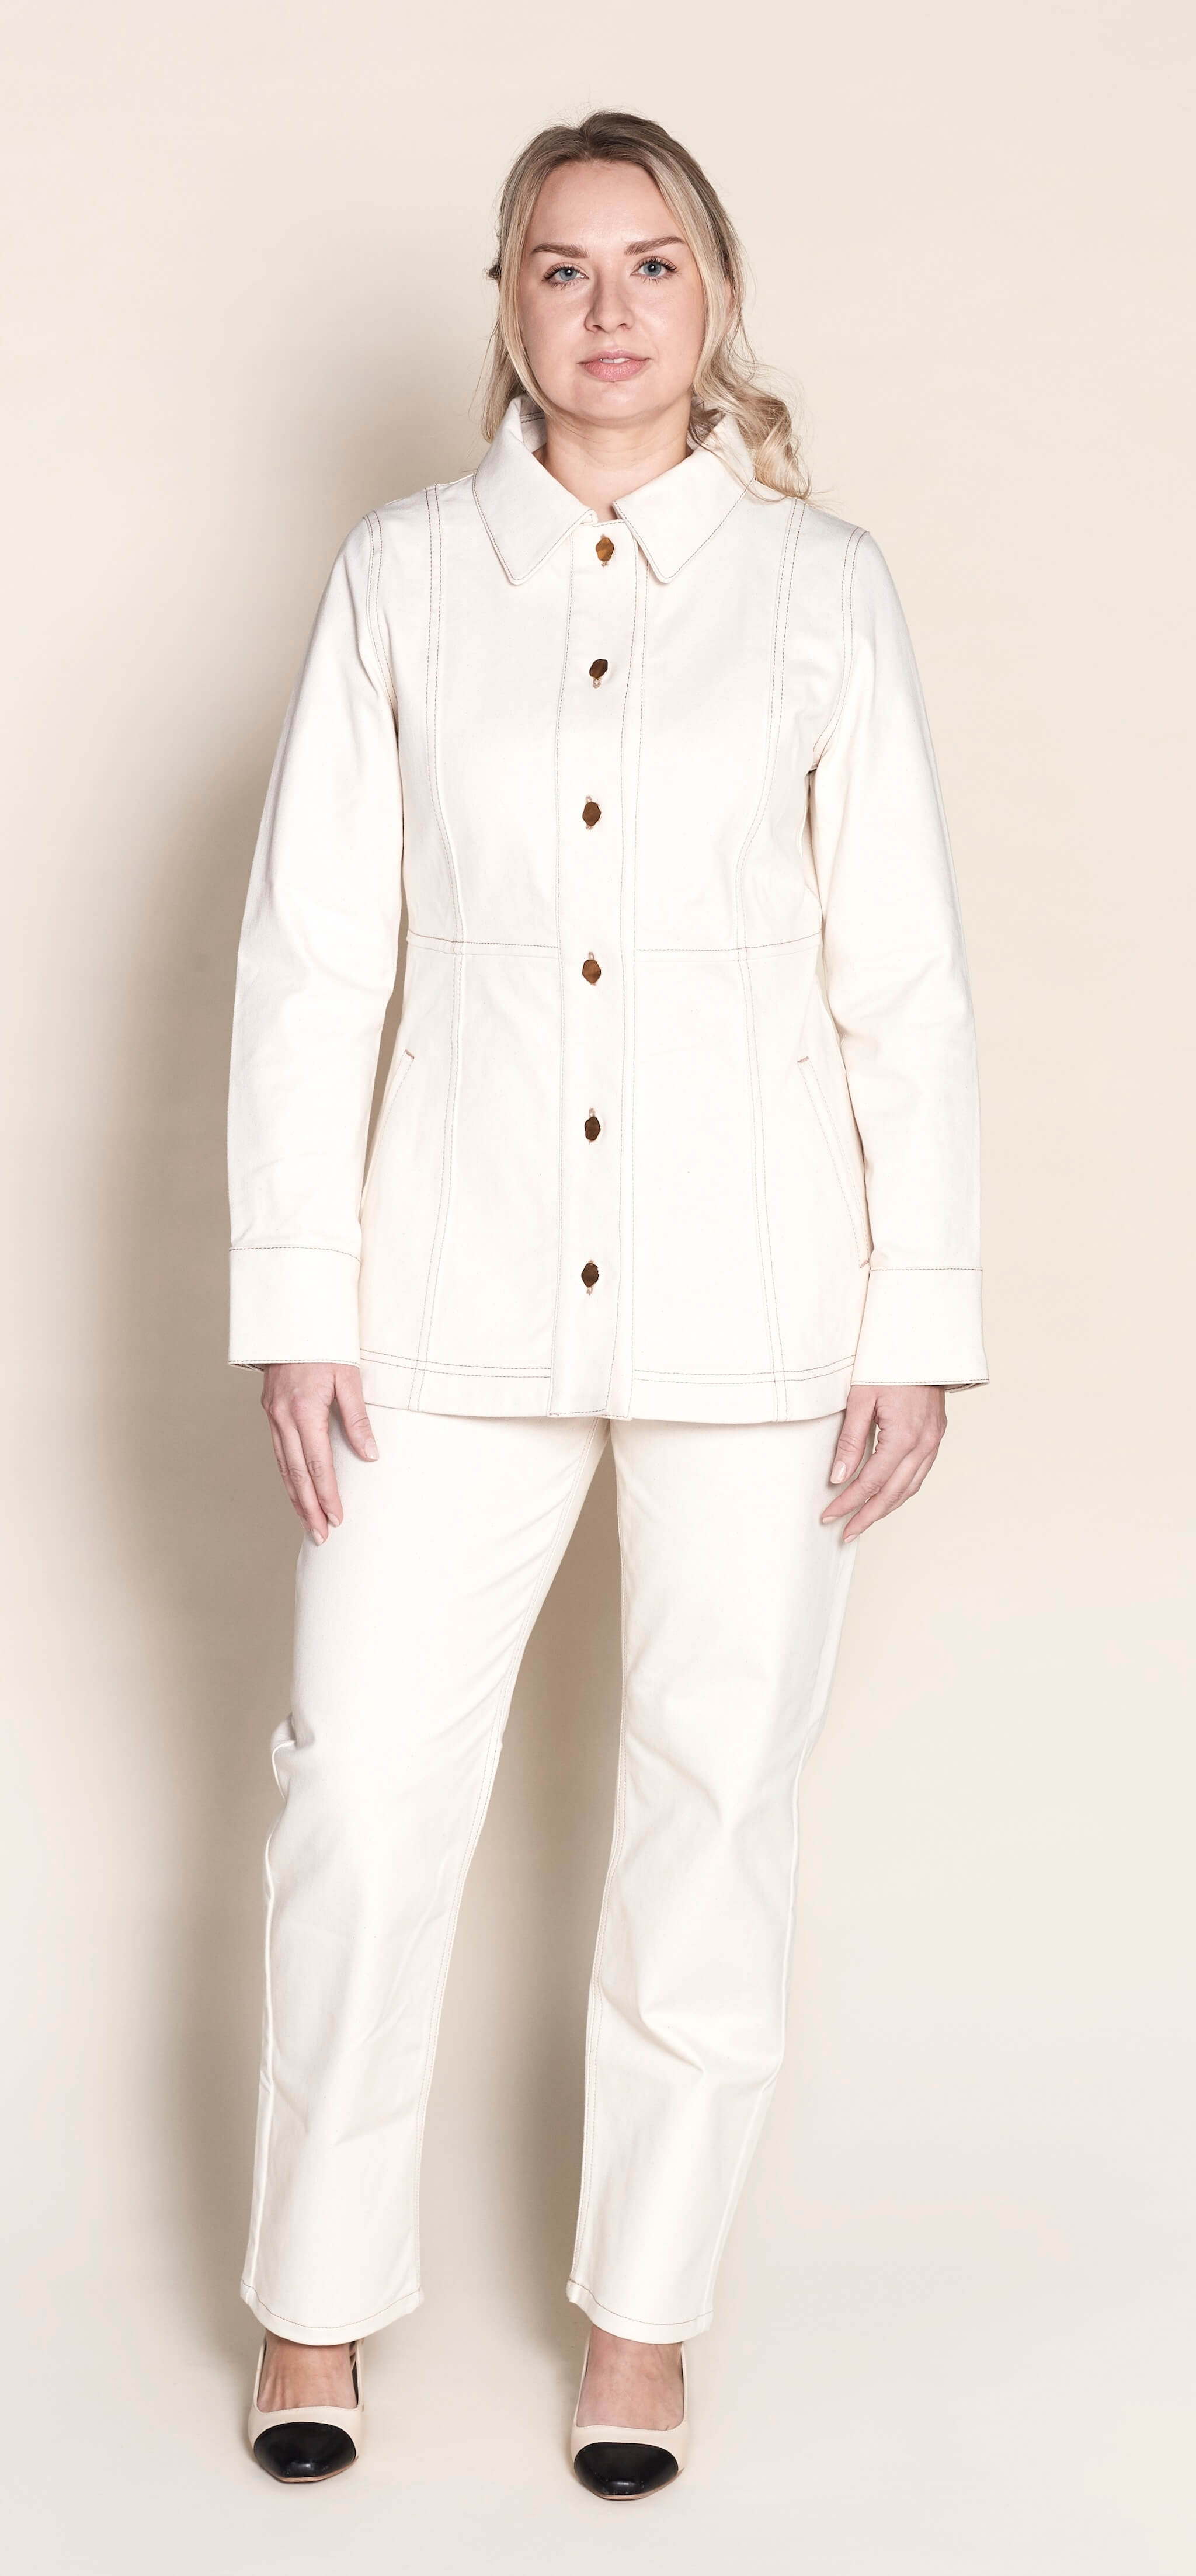 Model stands confidently in Cyme Copenhagen's matching cream denim jacket and trousers set, featuring elegant gold button details, showcasing the timeless appeal and sustainable craftsmanship of Danish design in women's fashion.